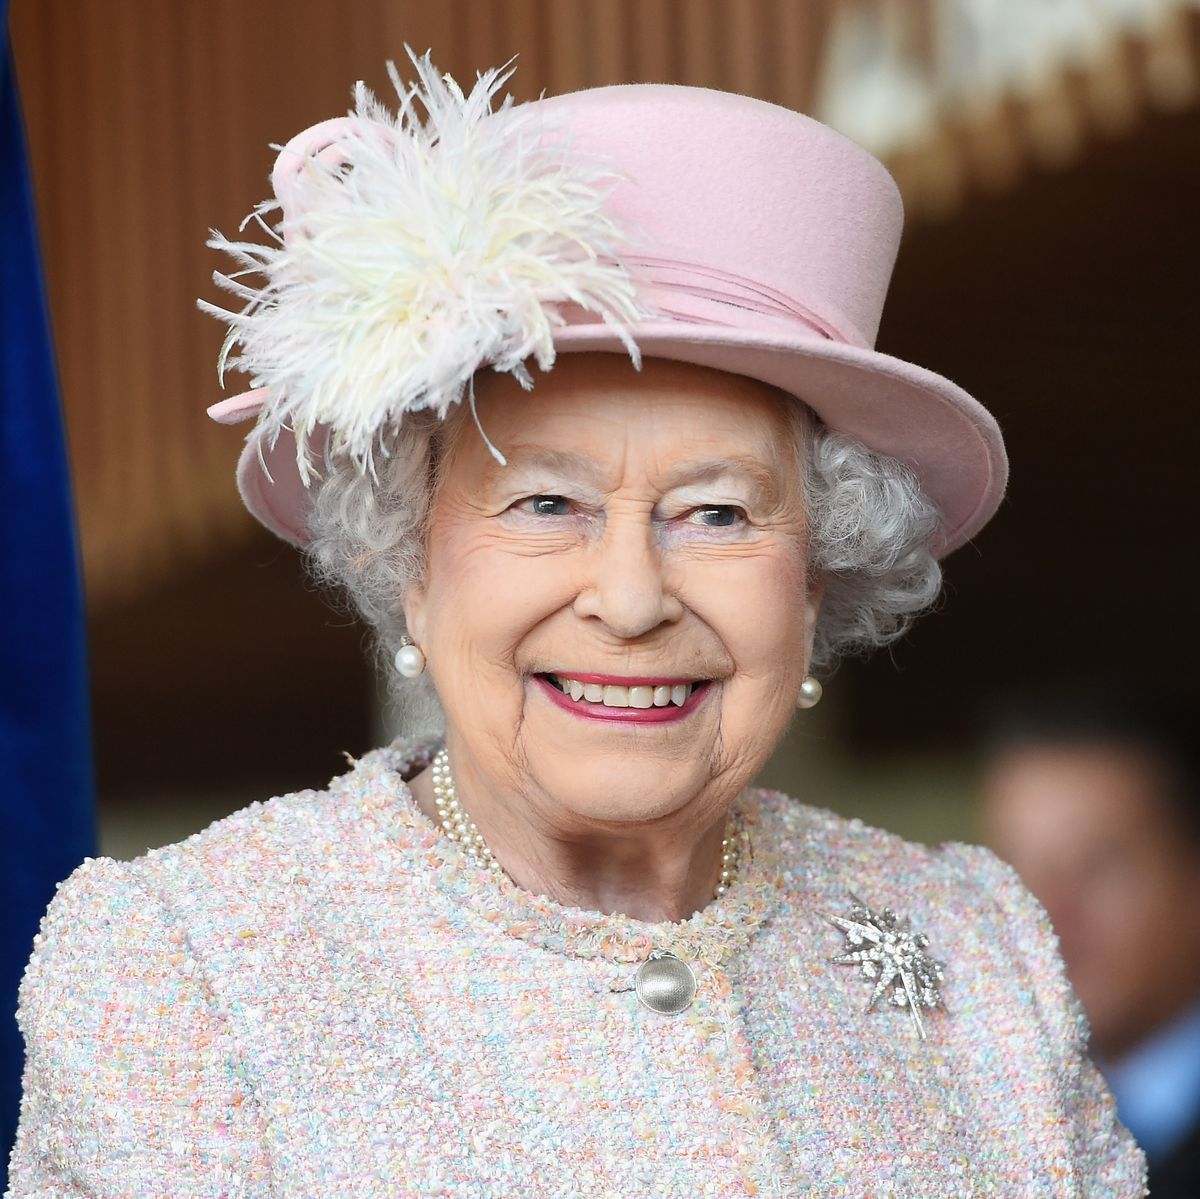 The Queen's Favourite Handbag Brand Has Released New Styles For Her Birthday